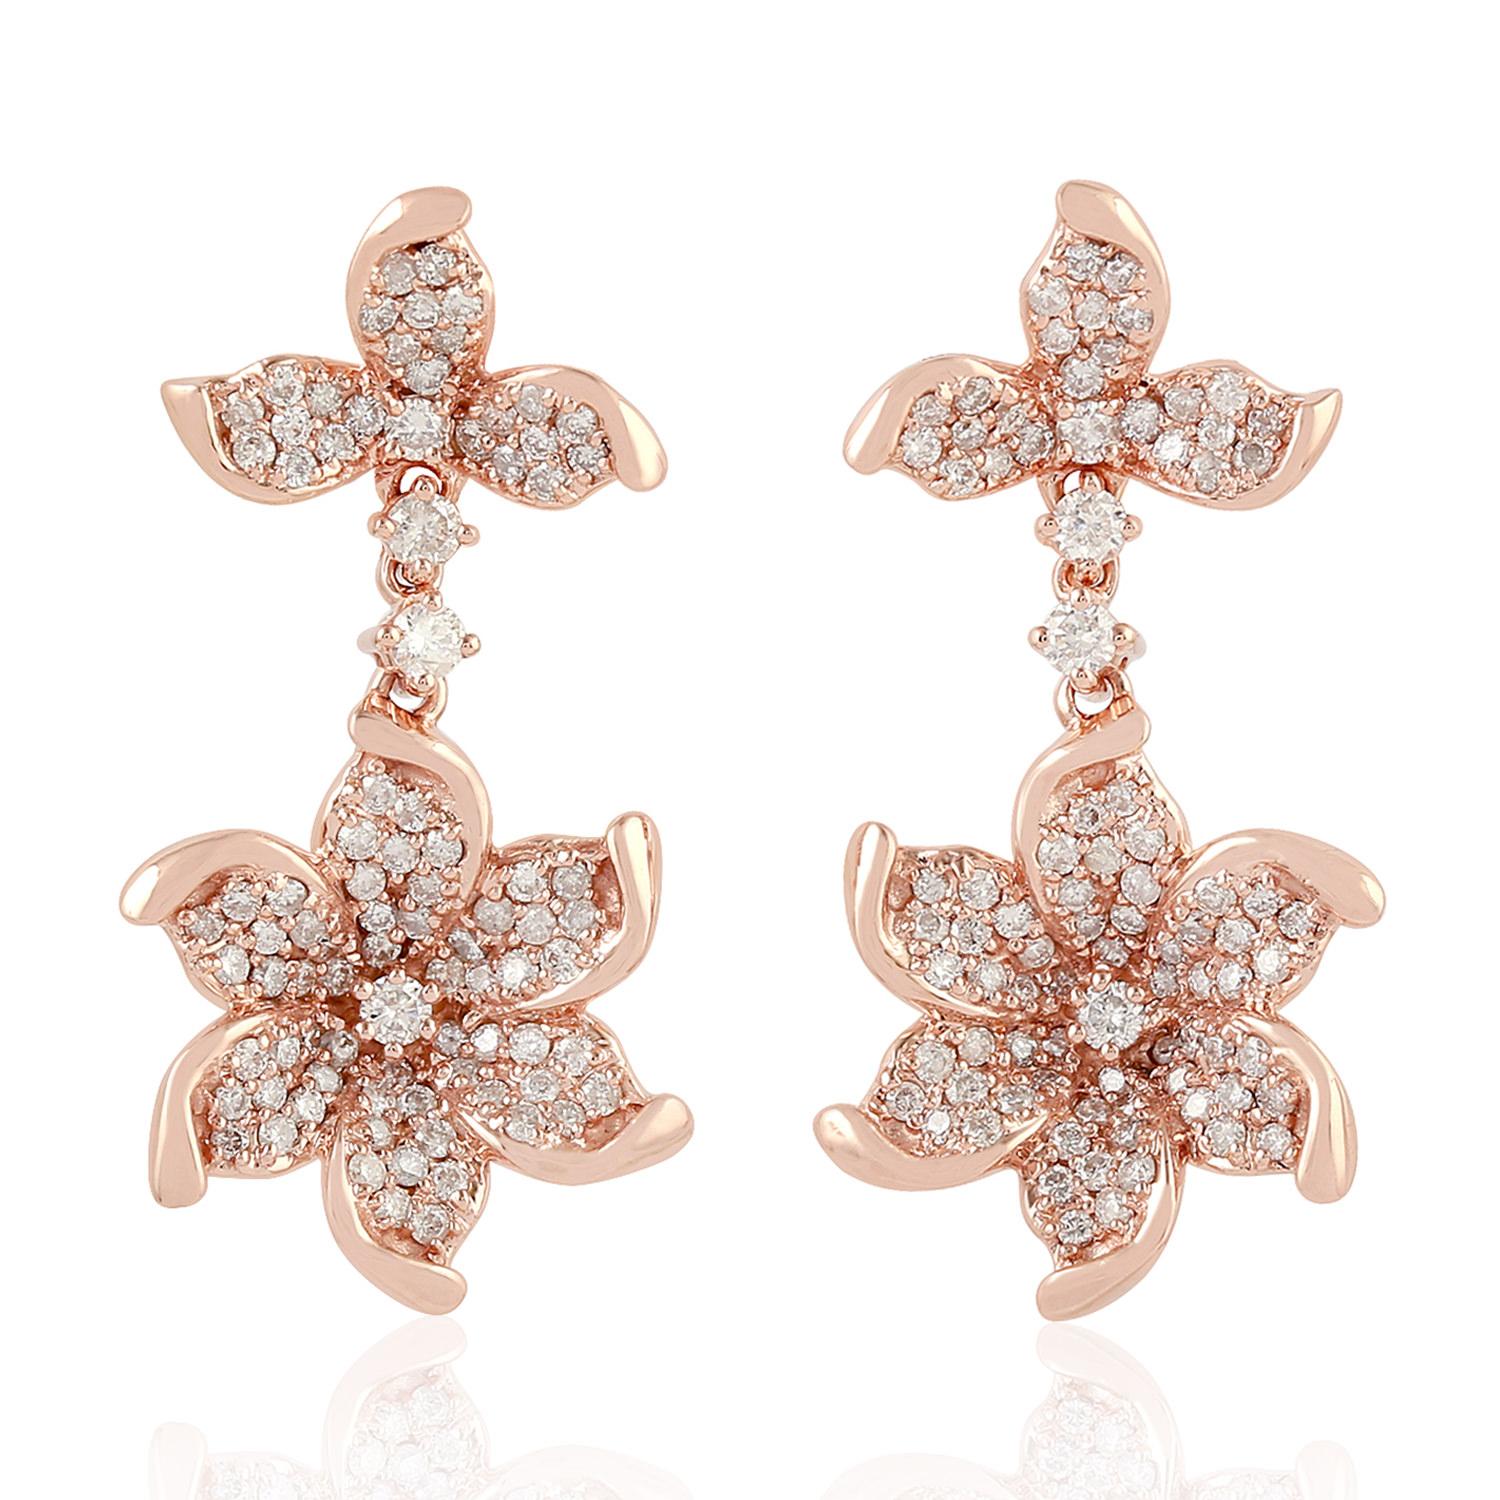 Mixed Cut Designer Floral Pattern Earrings with Pave Diamonds Made in 18k Rose Gold For Sale